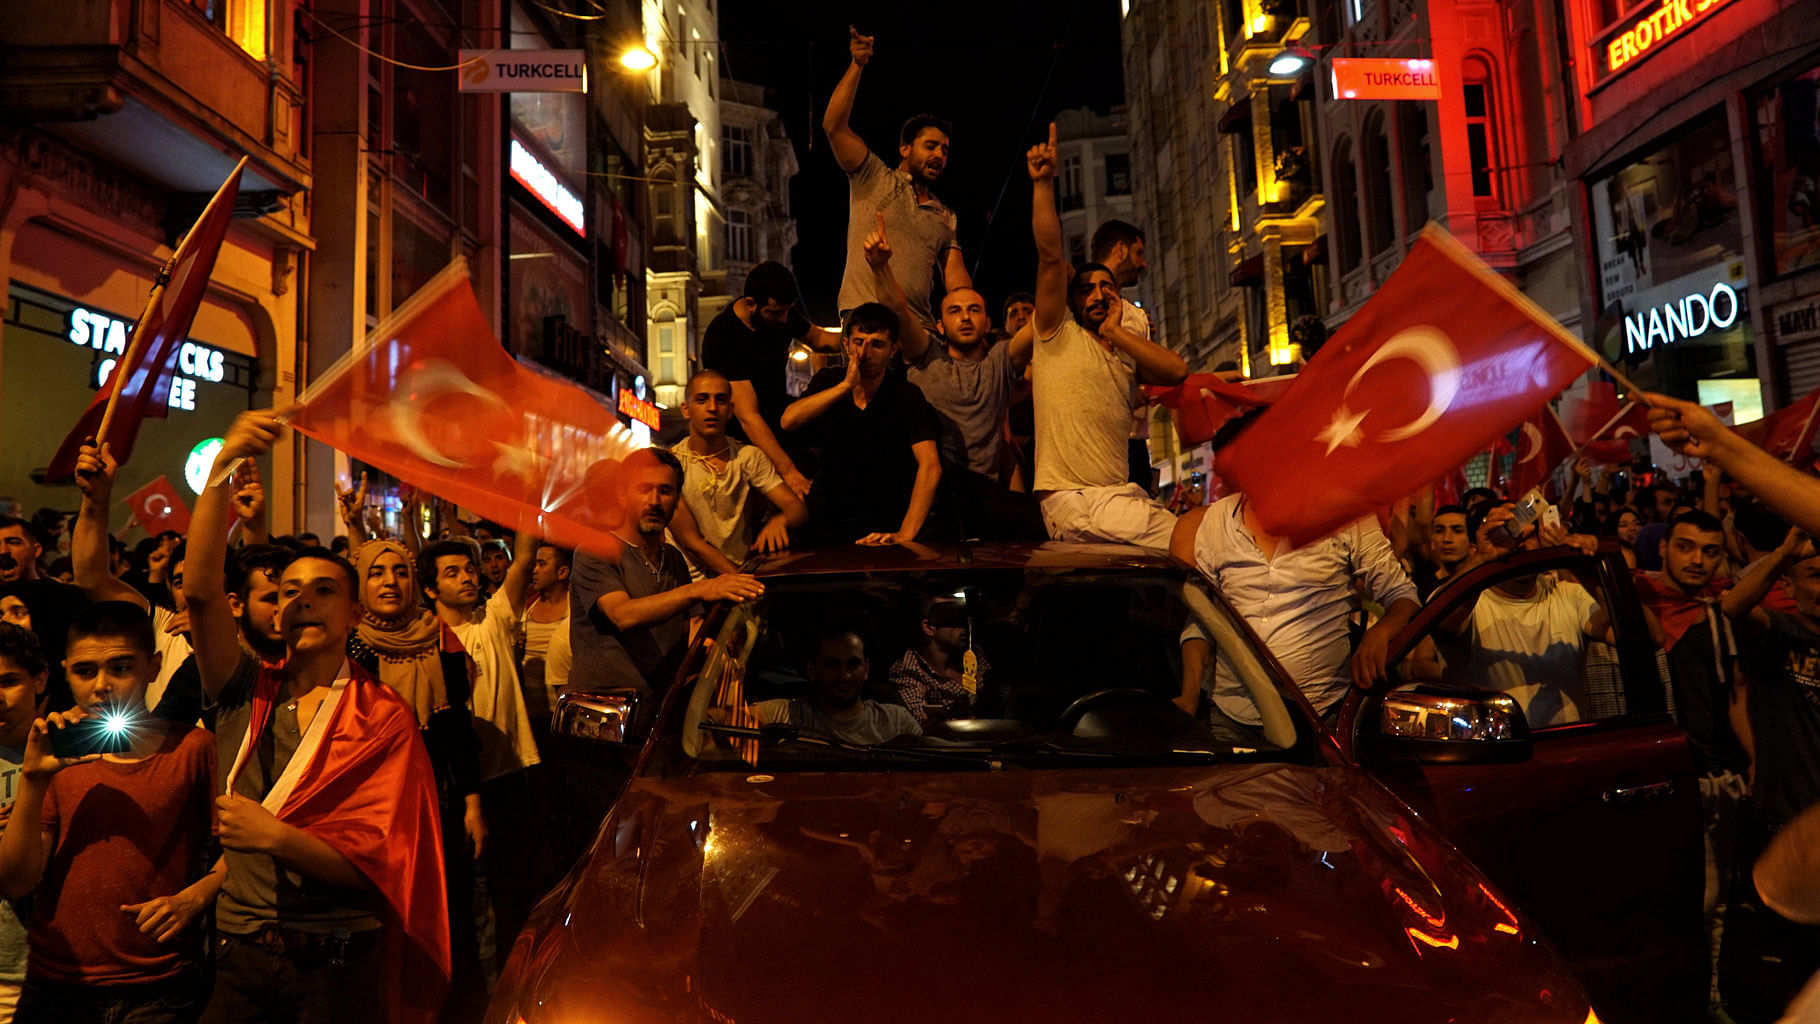 Following the attempted military coup in Turkey, President Erdogan has widened the purge on the army, targeting over 50,000. (Photo: AP)